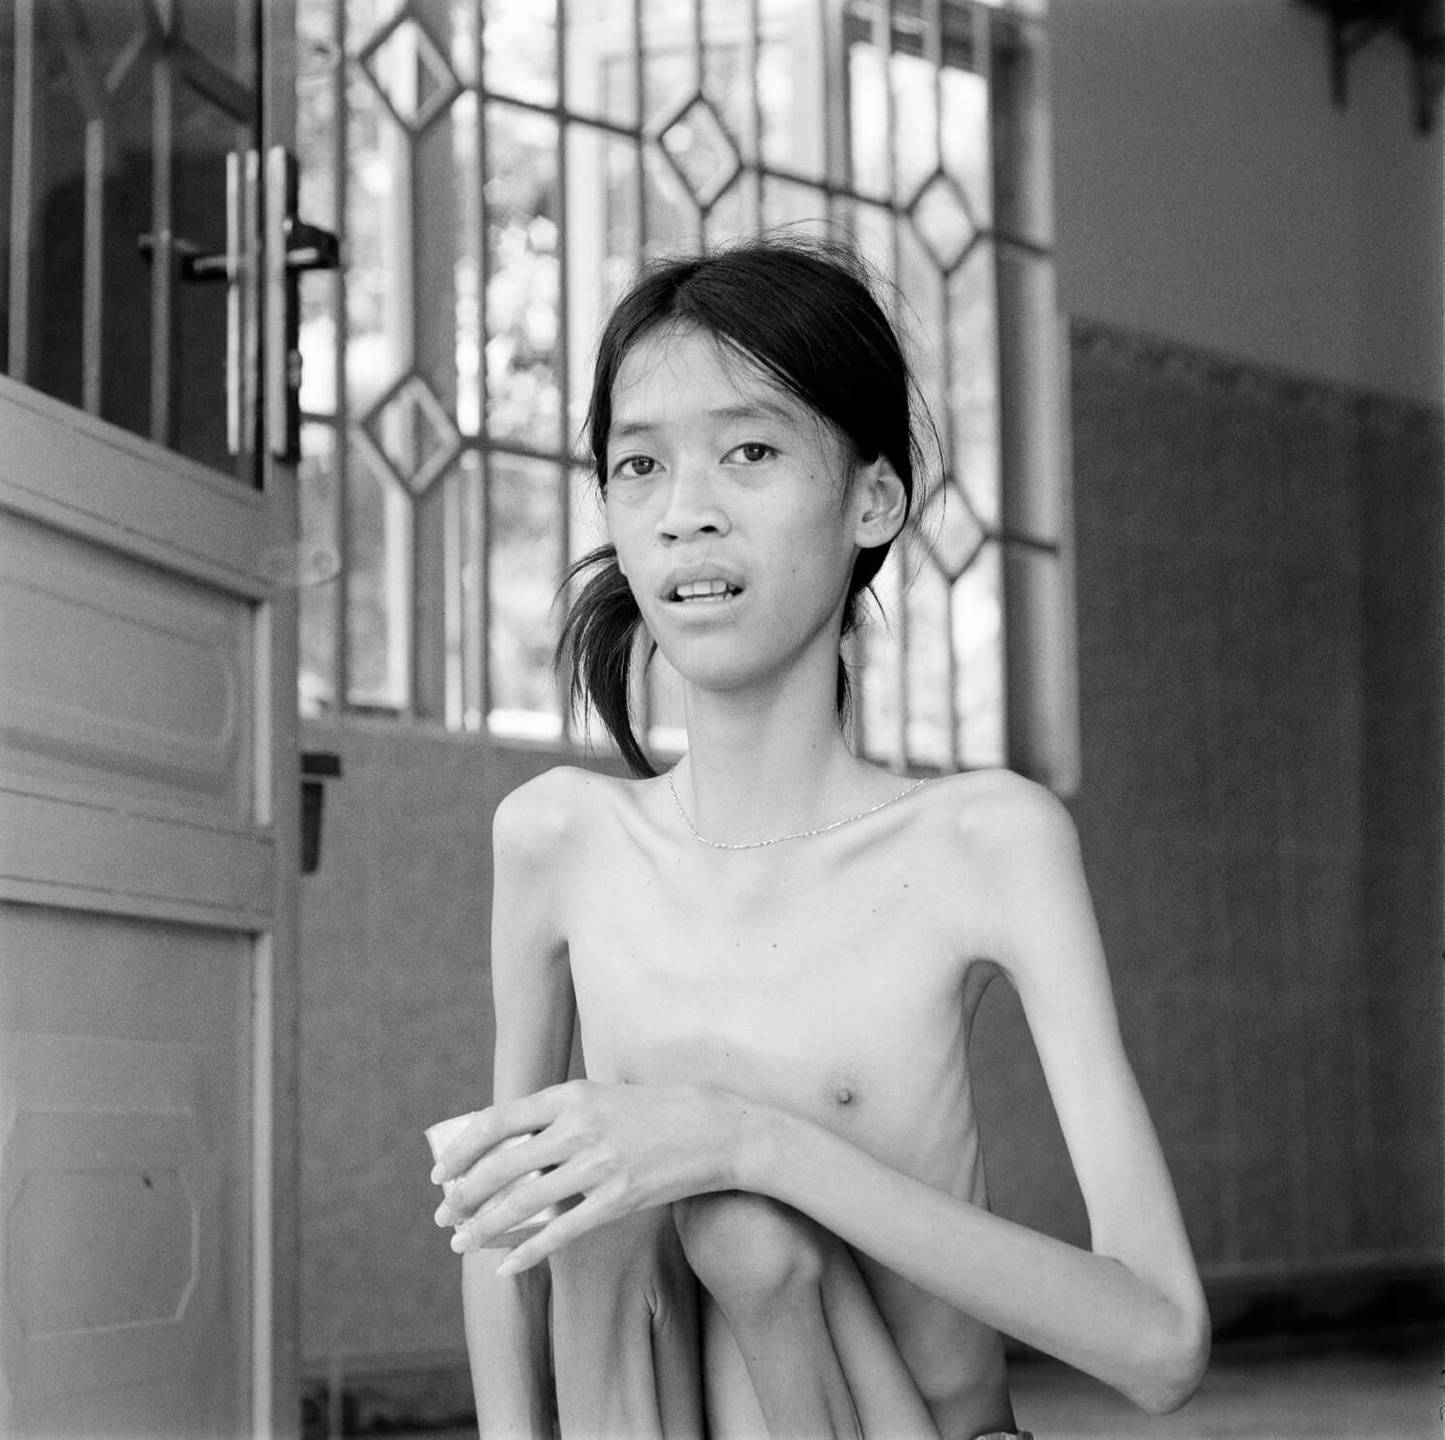 A deformed Asian child, seated with her thin, frail legs against her chest.